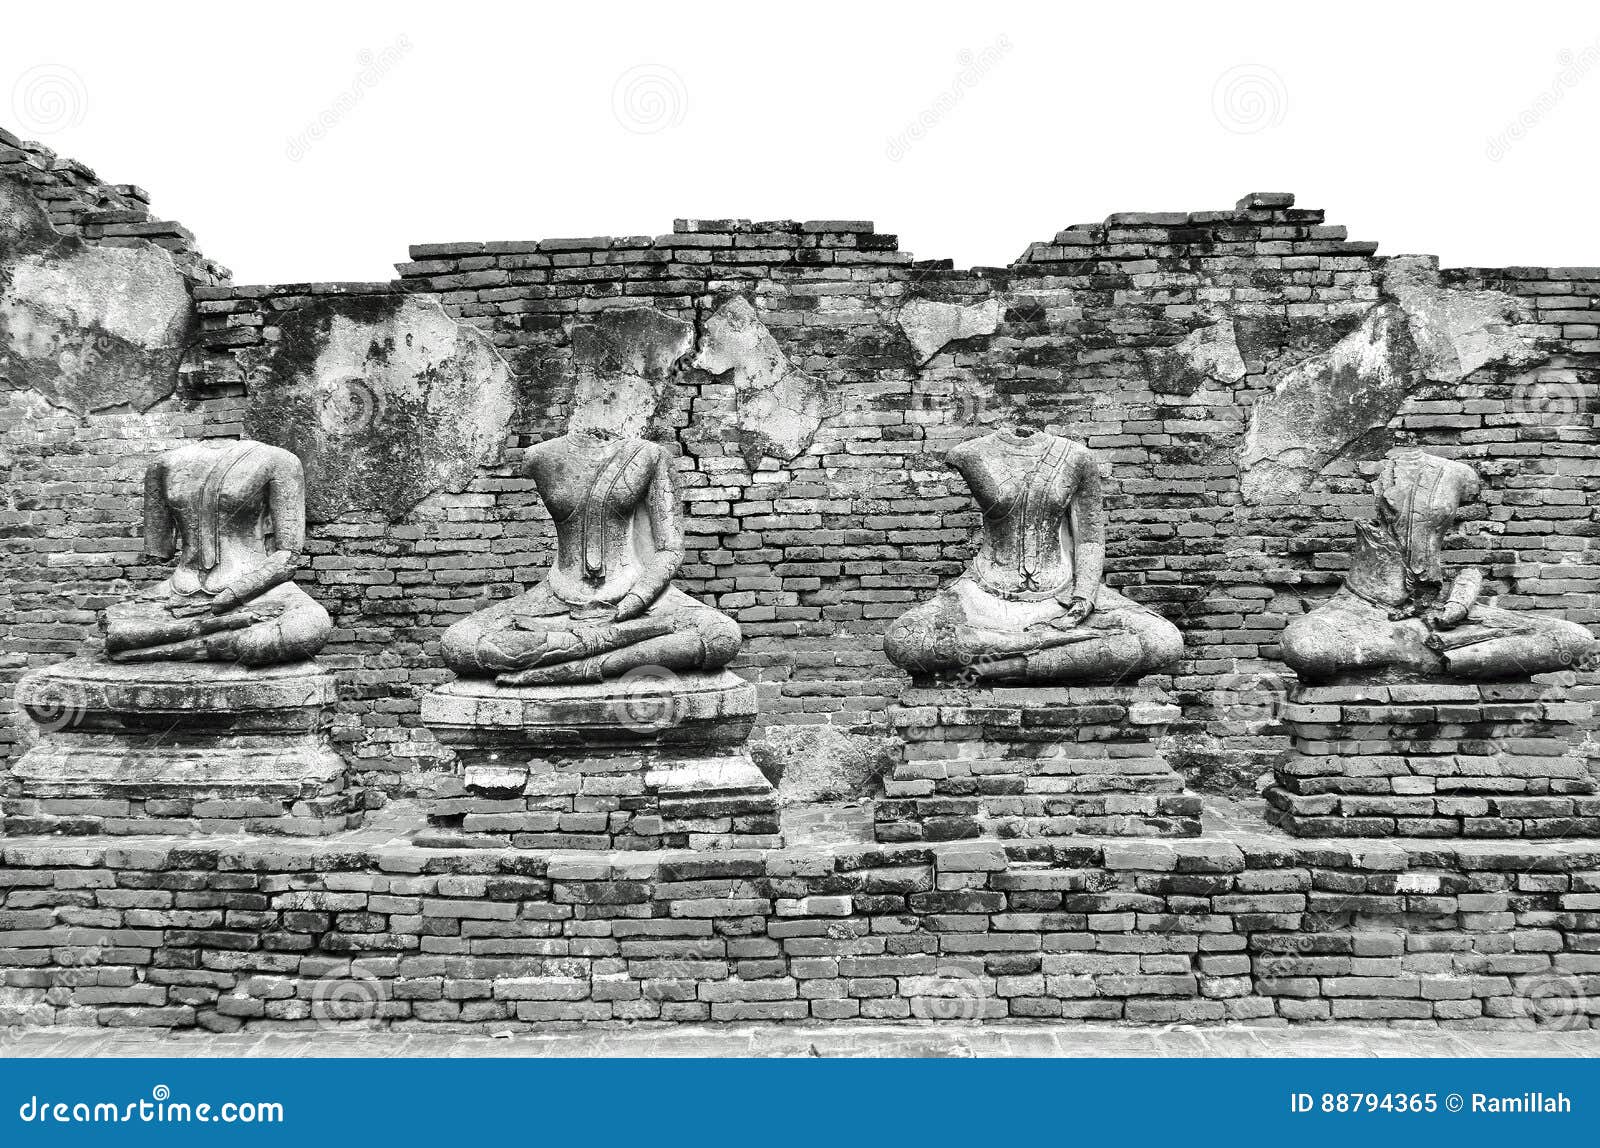 broken ancient buddha statues ruins at wat chaiwatthanaram in the historic city of ayutthaya, thailand in classic vintage black an